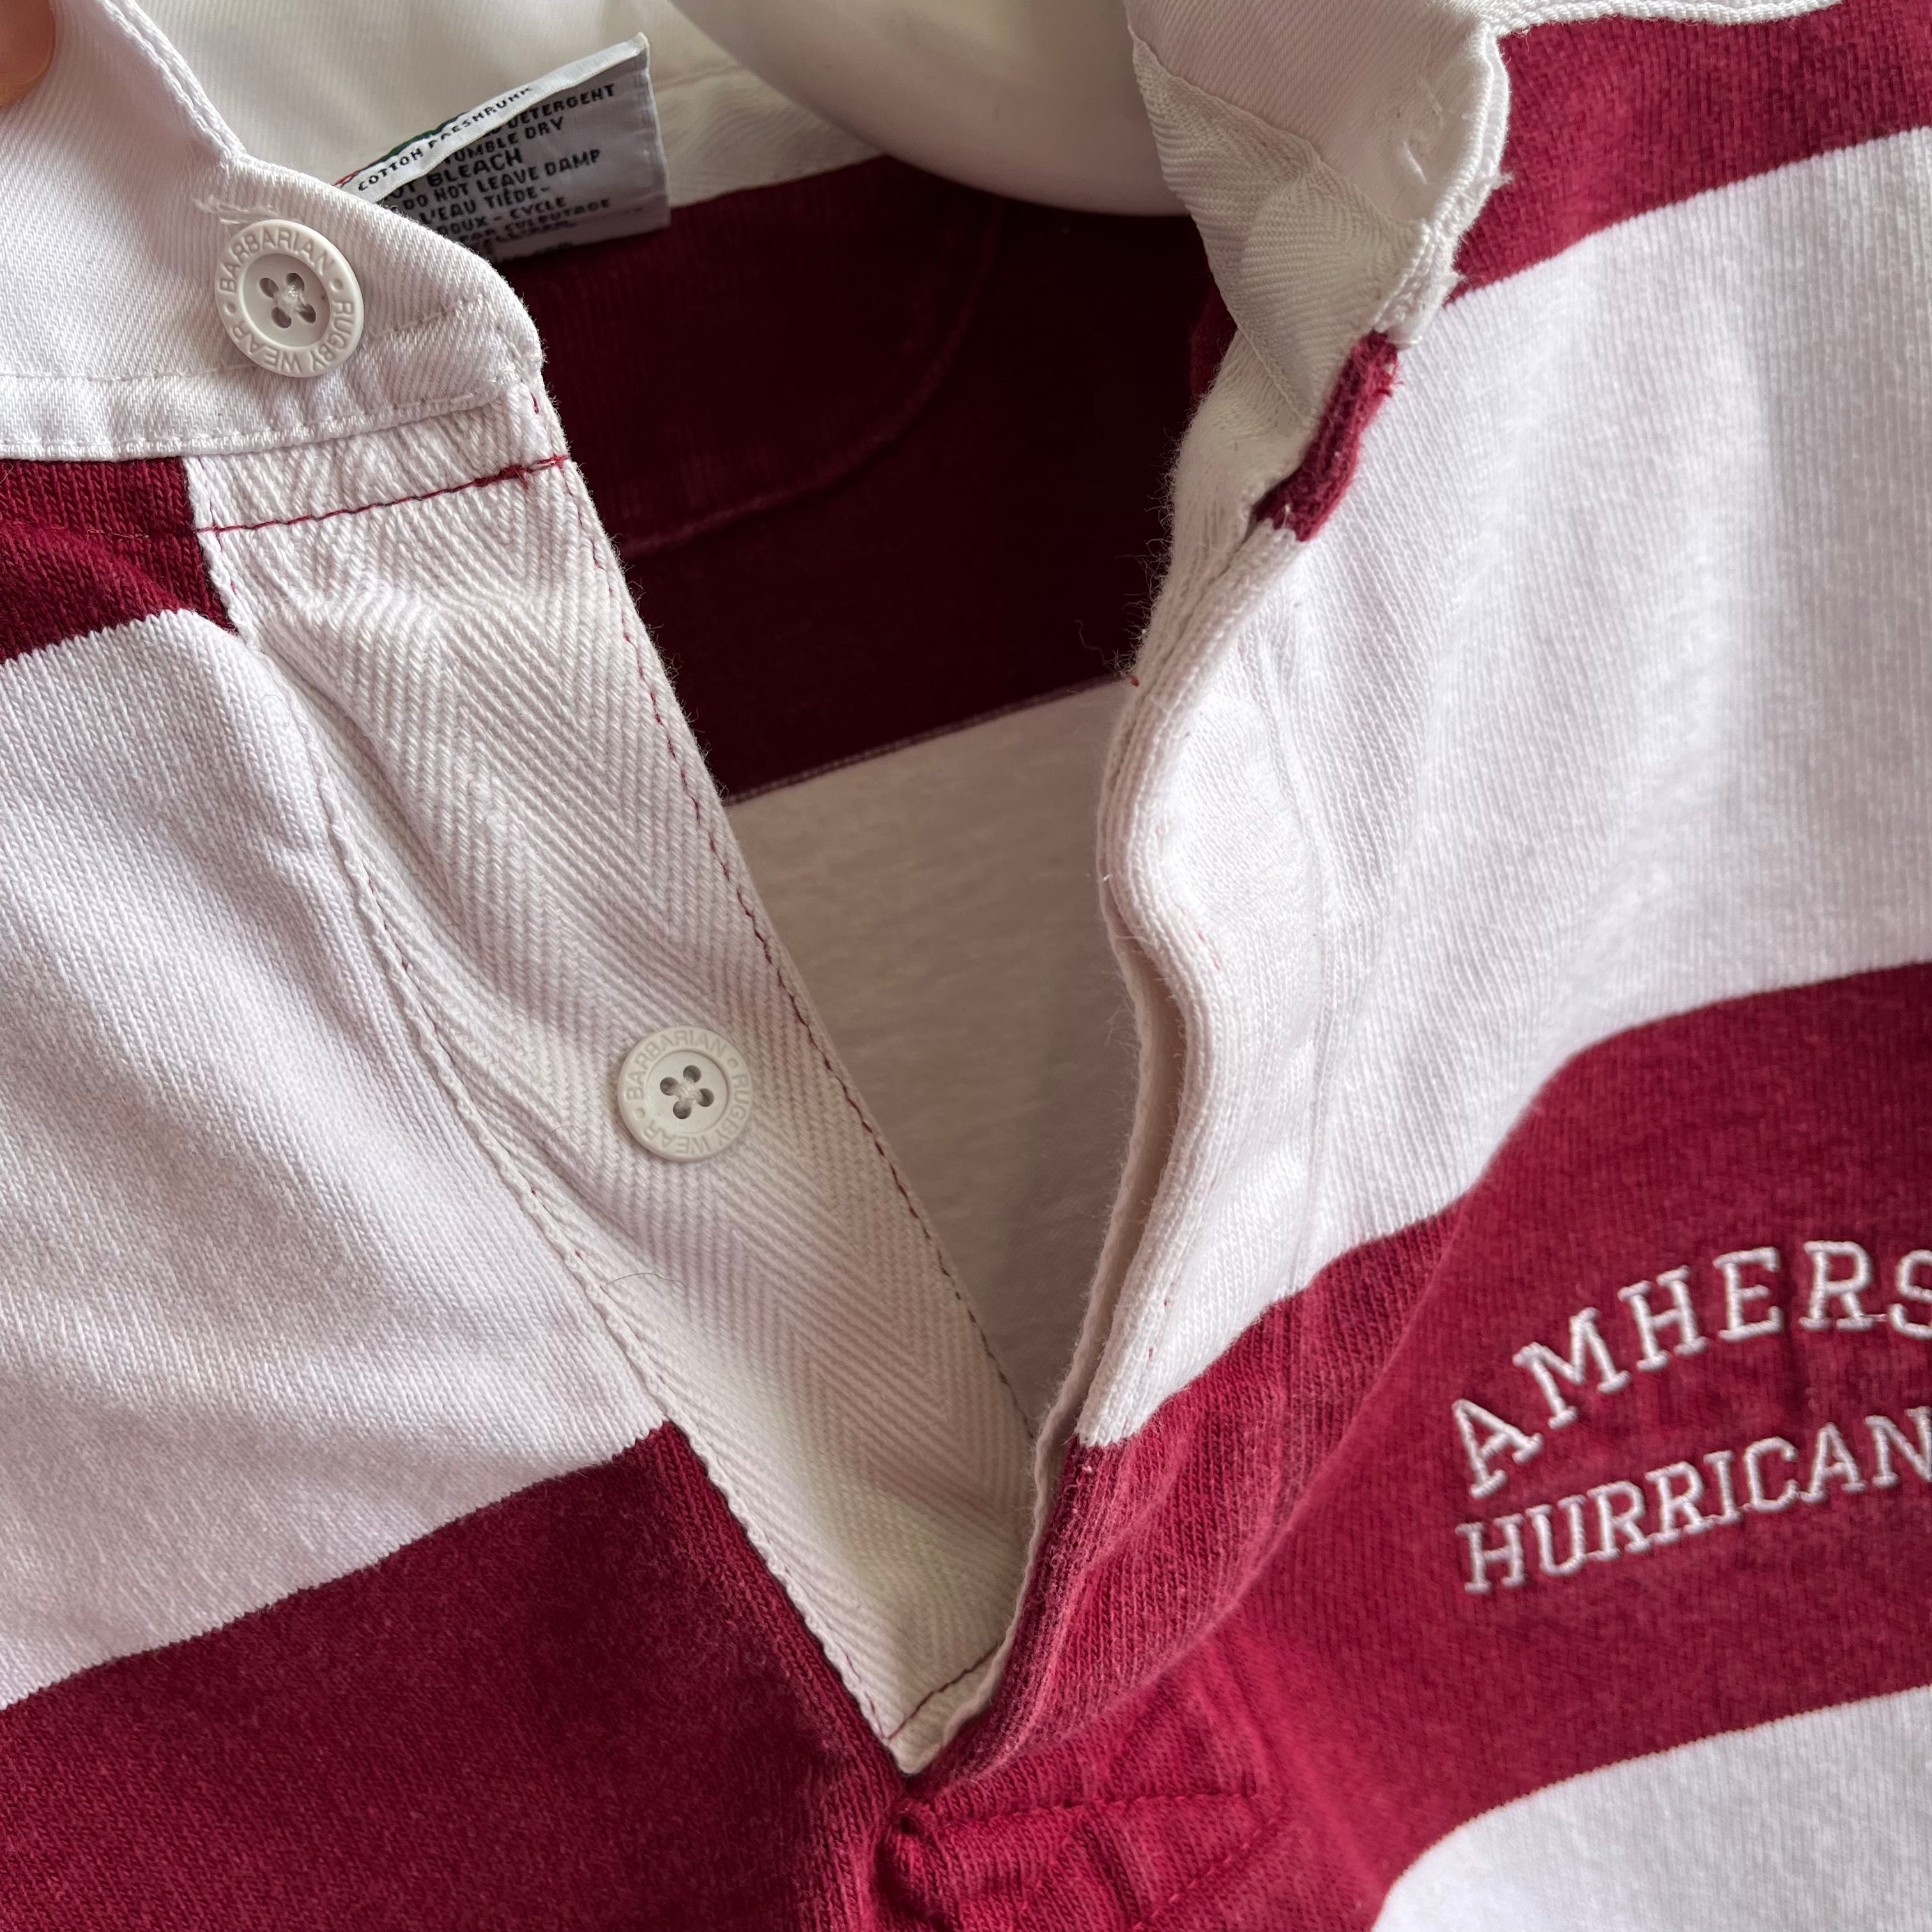 1990s Amherst Hurricanes Rugby Shirt